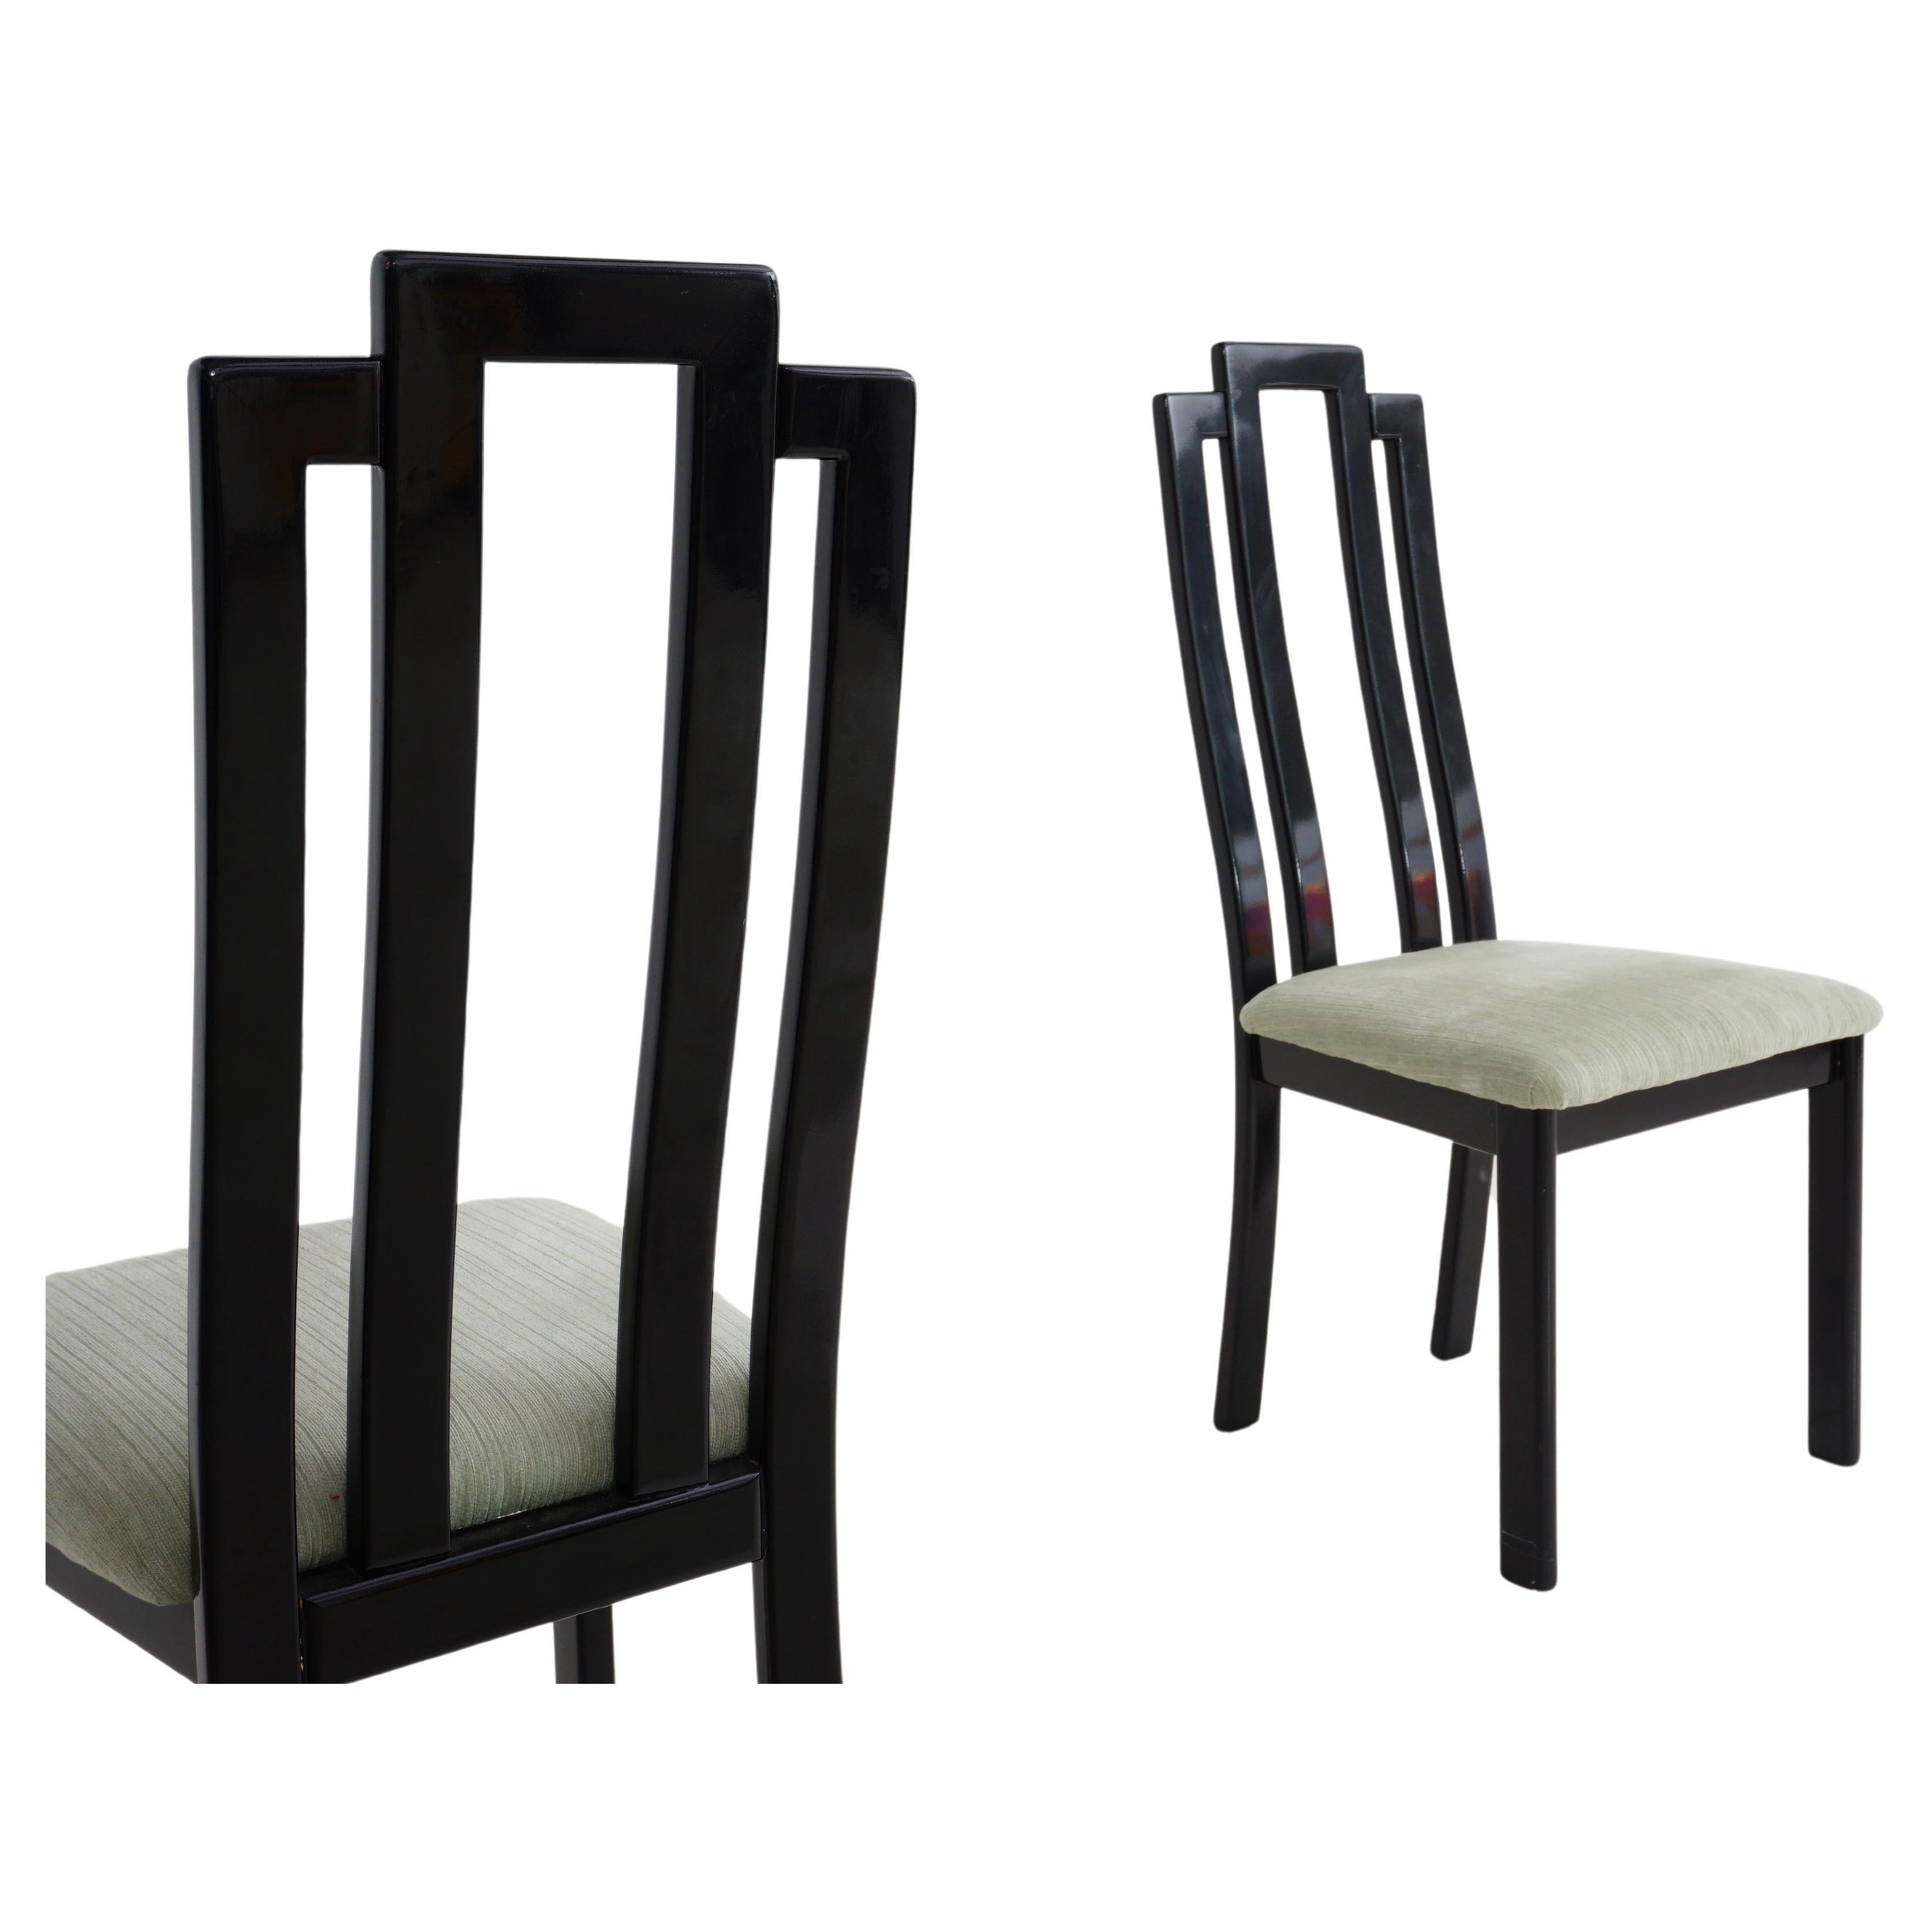 These postmodern dining chairs are the epitome of sleek sophistication, dressed in a sumptuous coat of black lacquer that exudes timeless elegance. With sinuous lines and a dash of audacious flair, they effortlessly blend the avant-garde with the